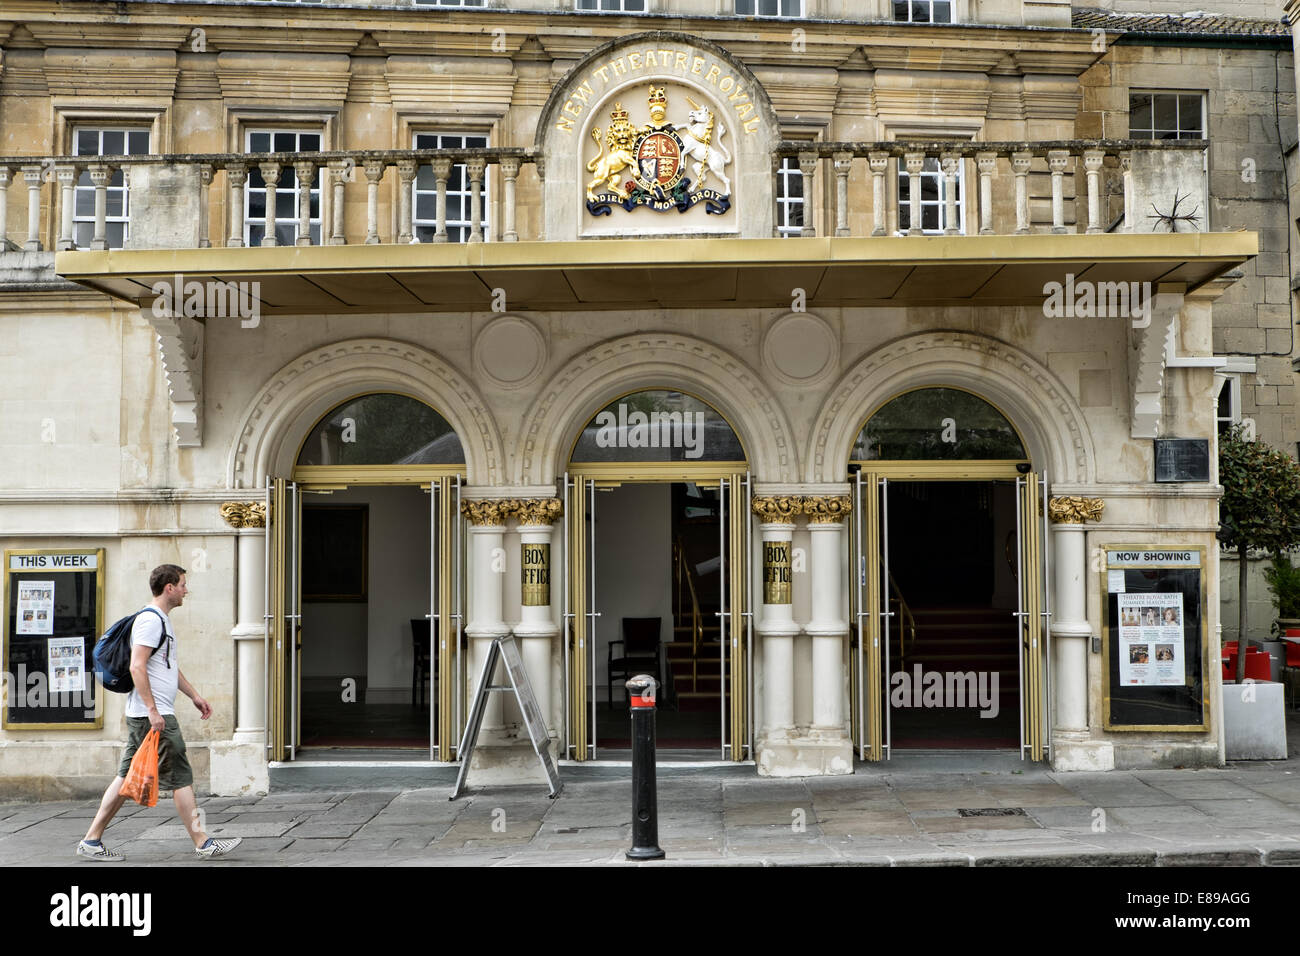 A pedestrian walking past the entrance to the historic New Theatre Royal in the world heritage city of Bath, Somerset, UK Stock Photo